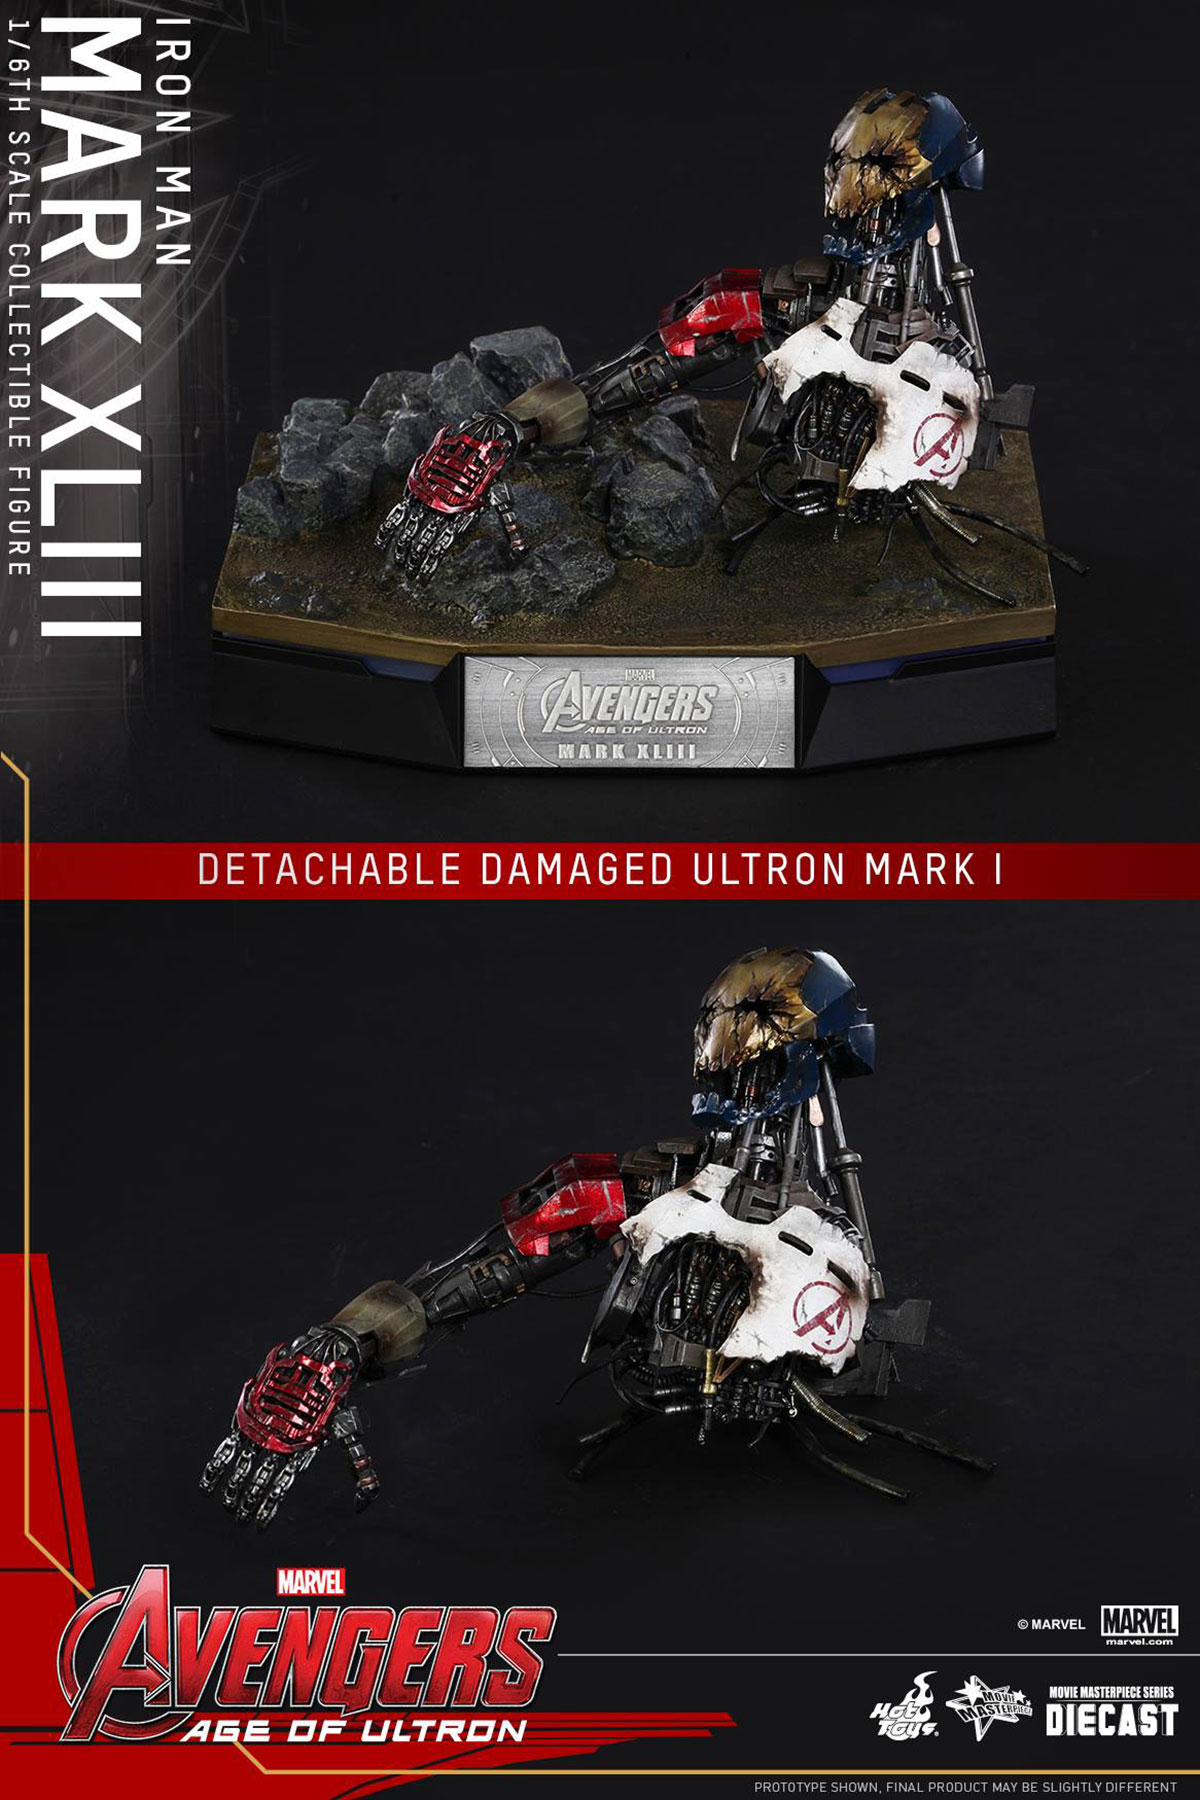 Hot Toys’ Age Of Ultron Iron Man Is Totally Metal